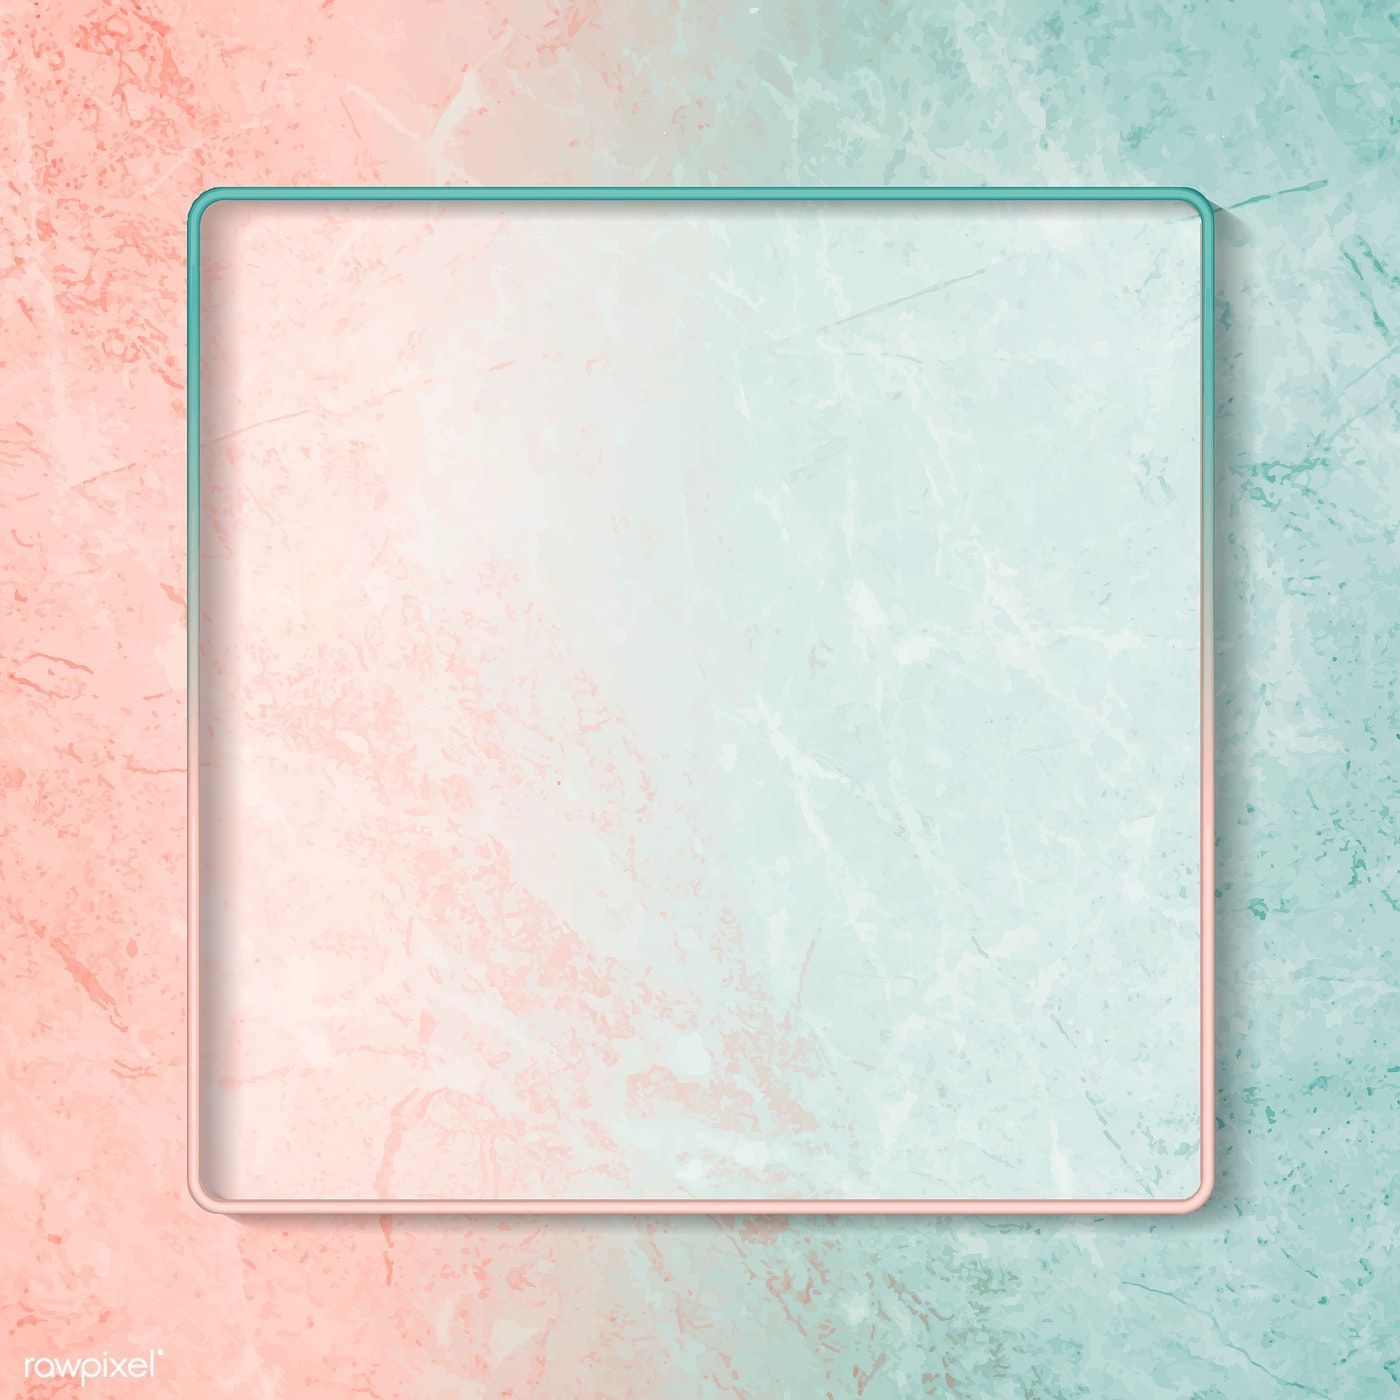 Download premium vector of Square frame on abstract background